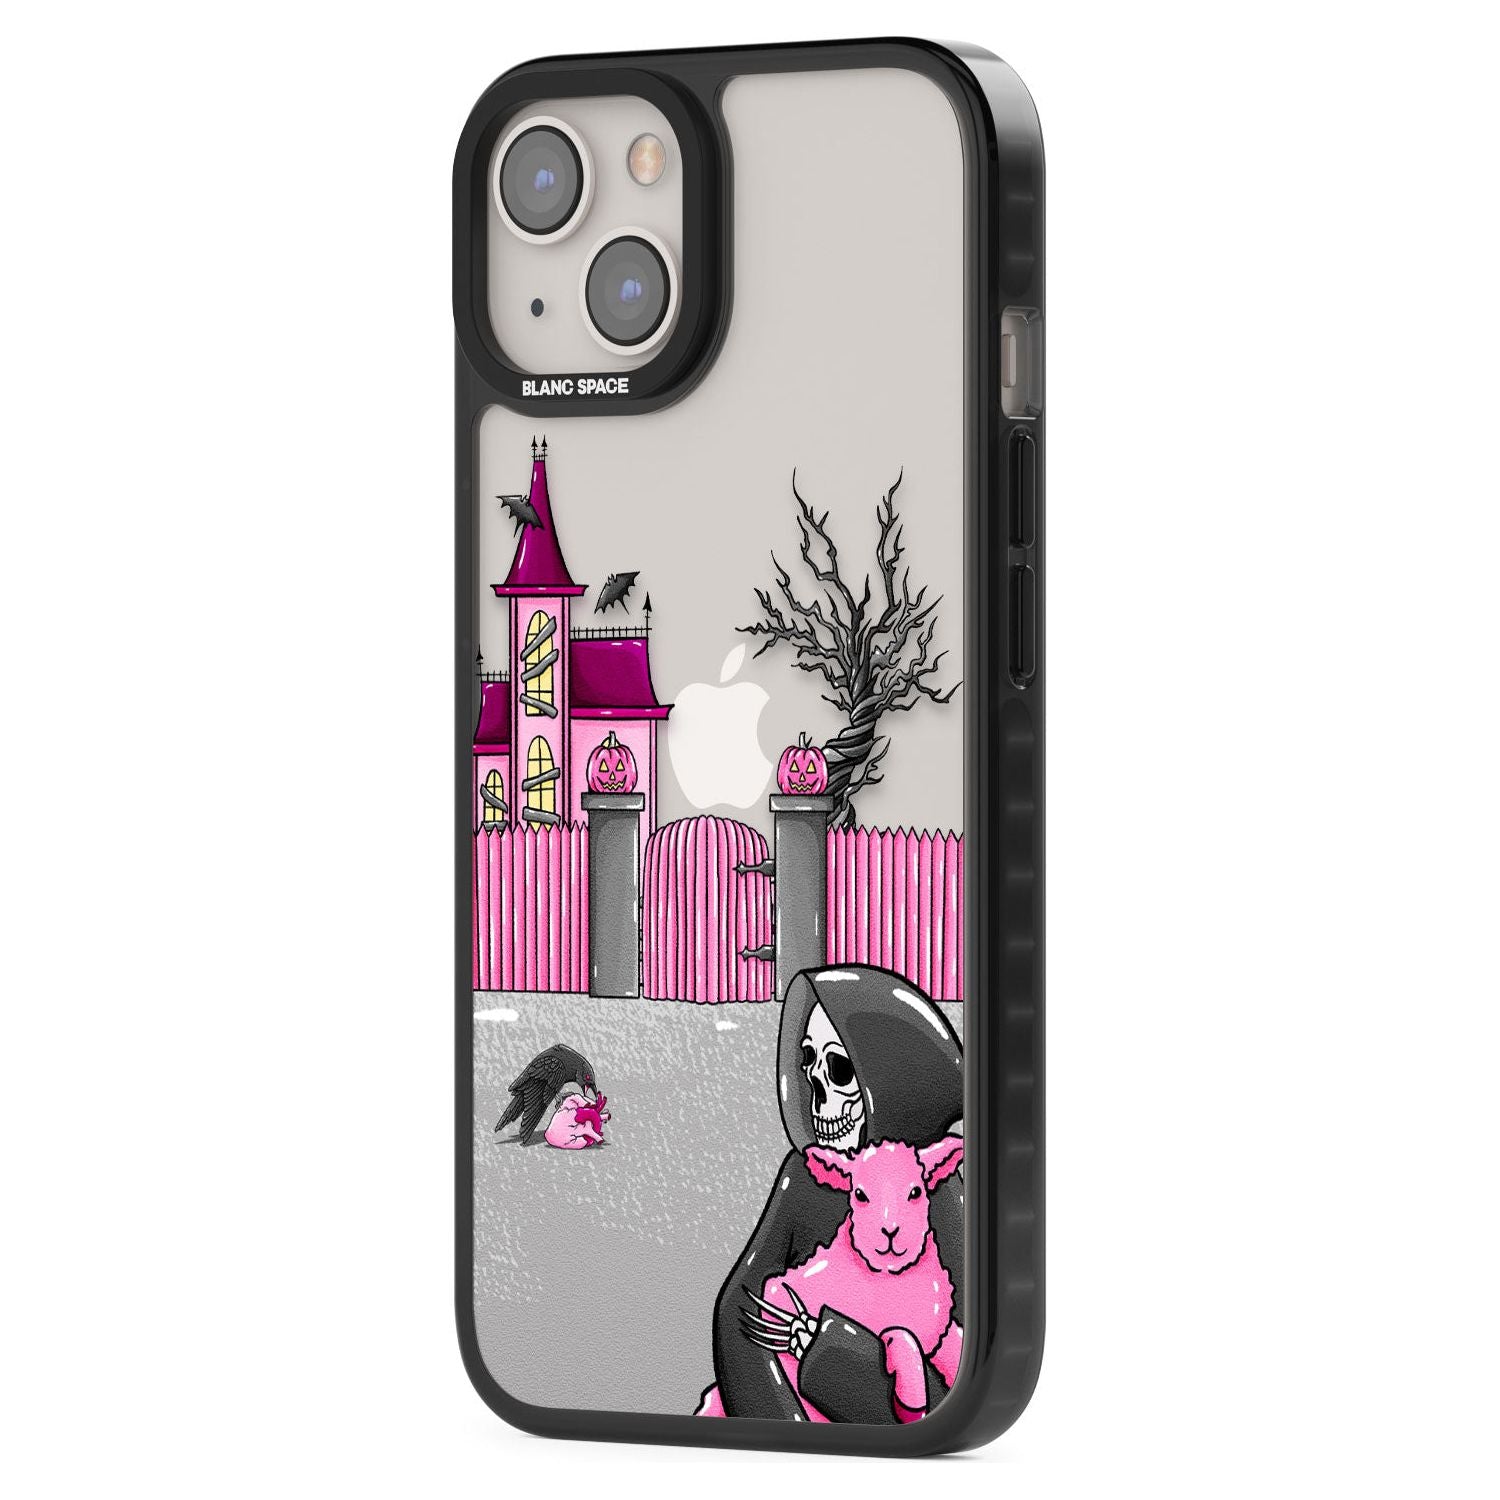 Left With My Heart Phone Case iPhone 15 Pro Max / Black Impact Case,iPhone 15 Plus / Black Impact Case,iPhone 15 Pro / Black Impact Case,iPhone 15 / Black Impact Case,iPhone 15 Pro Max / Impact Case,iPhone 15 Plus / Impact Case,iPhone 15 Pro / Impact Case,iPhone 15 / Impact Case,iPhone 15 Pro Max / Magsafe Black Impact Case,iPhone 15 Plus / Magsafe Black Impact Case,iPhone 15 Pro / Magsafe Black Impact Case,iPhone 15 / Magsafe Black Impact Case,iPhone 14 Pro Max / Black Impact Case,iPhone 14 Plus / Black Im